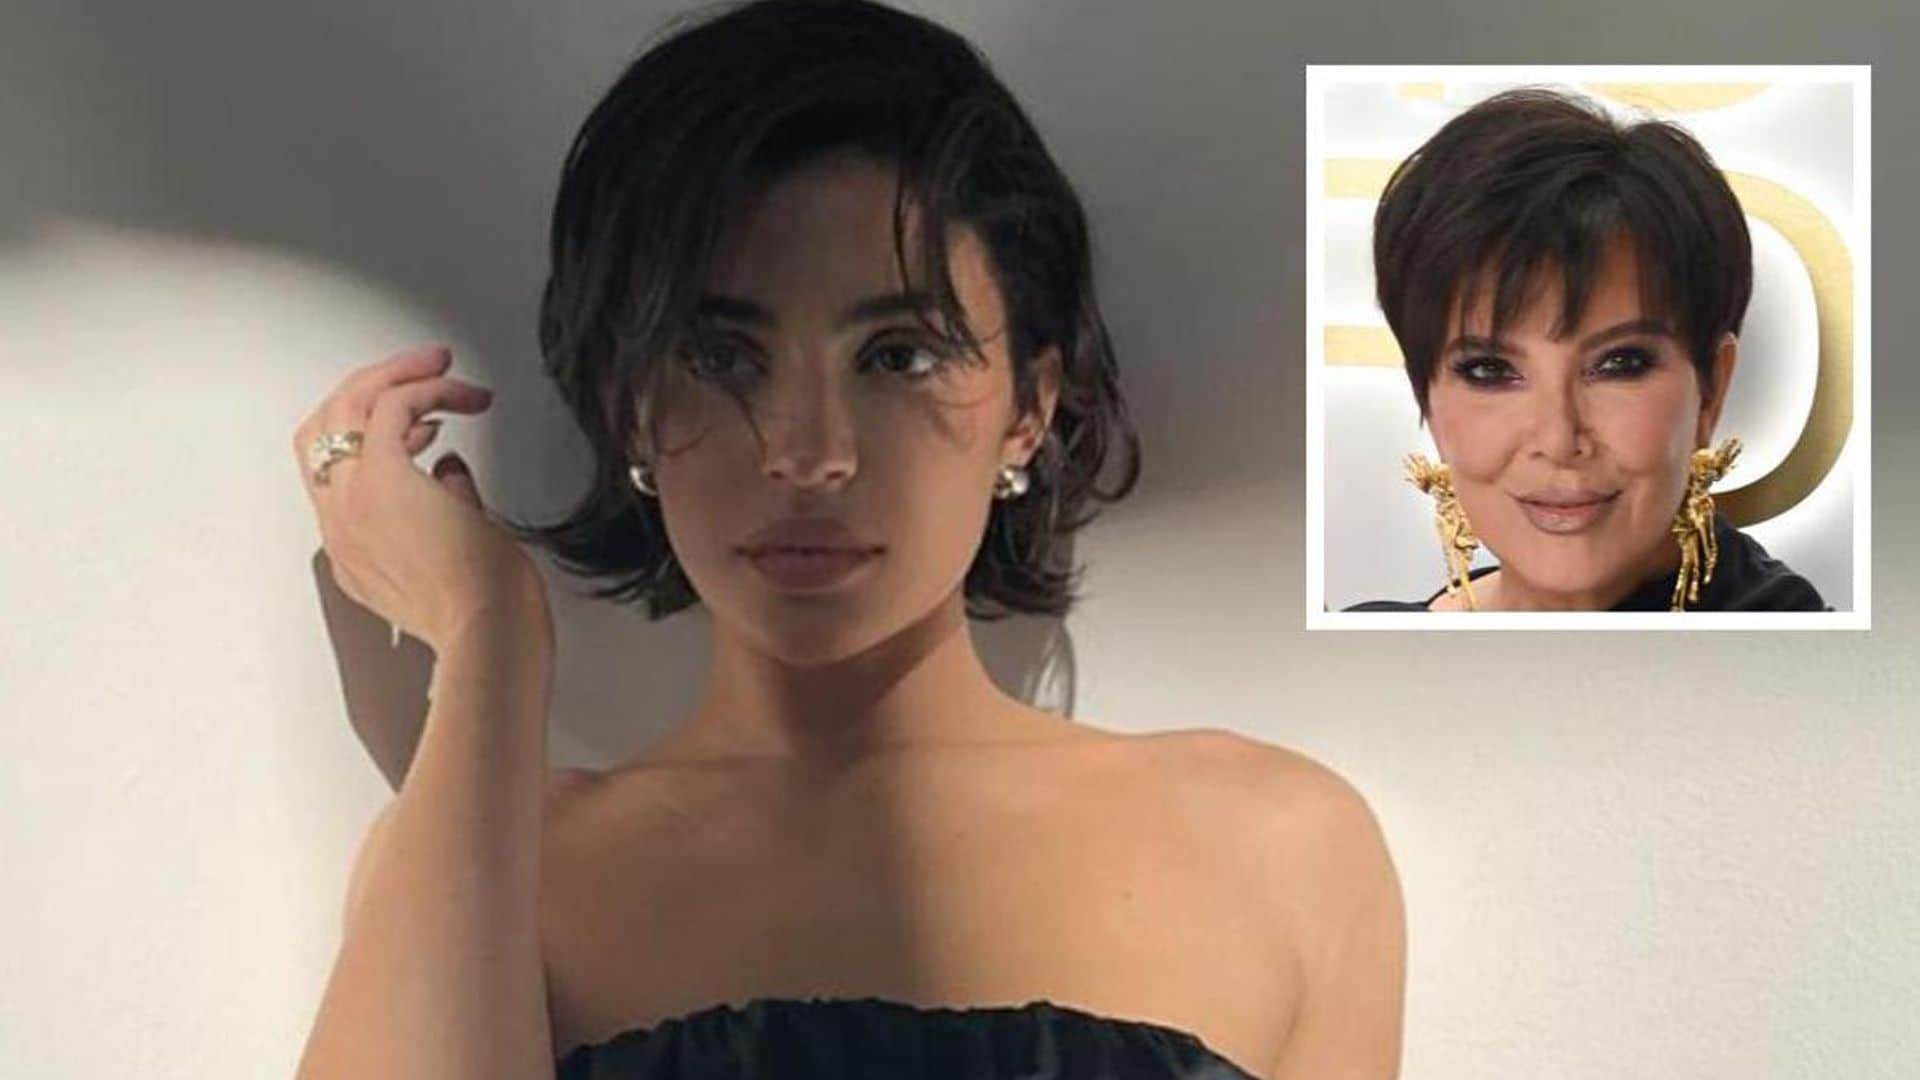 Kylie Jenner debuts dramatic Kris Jenner-inspired pixie haircut